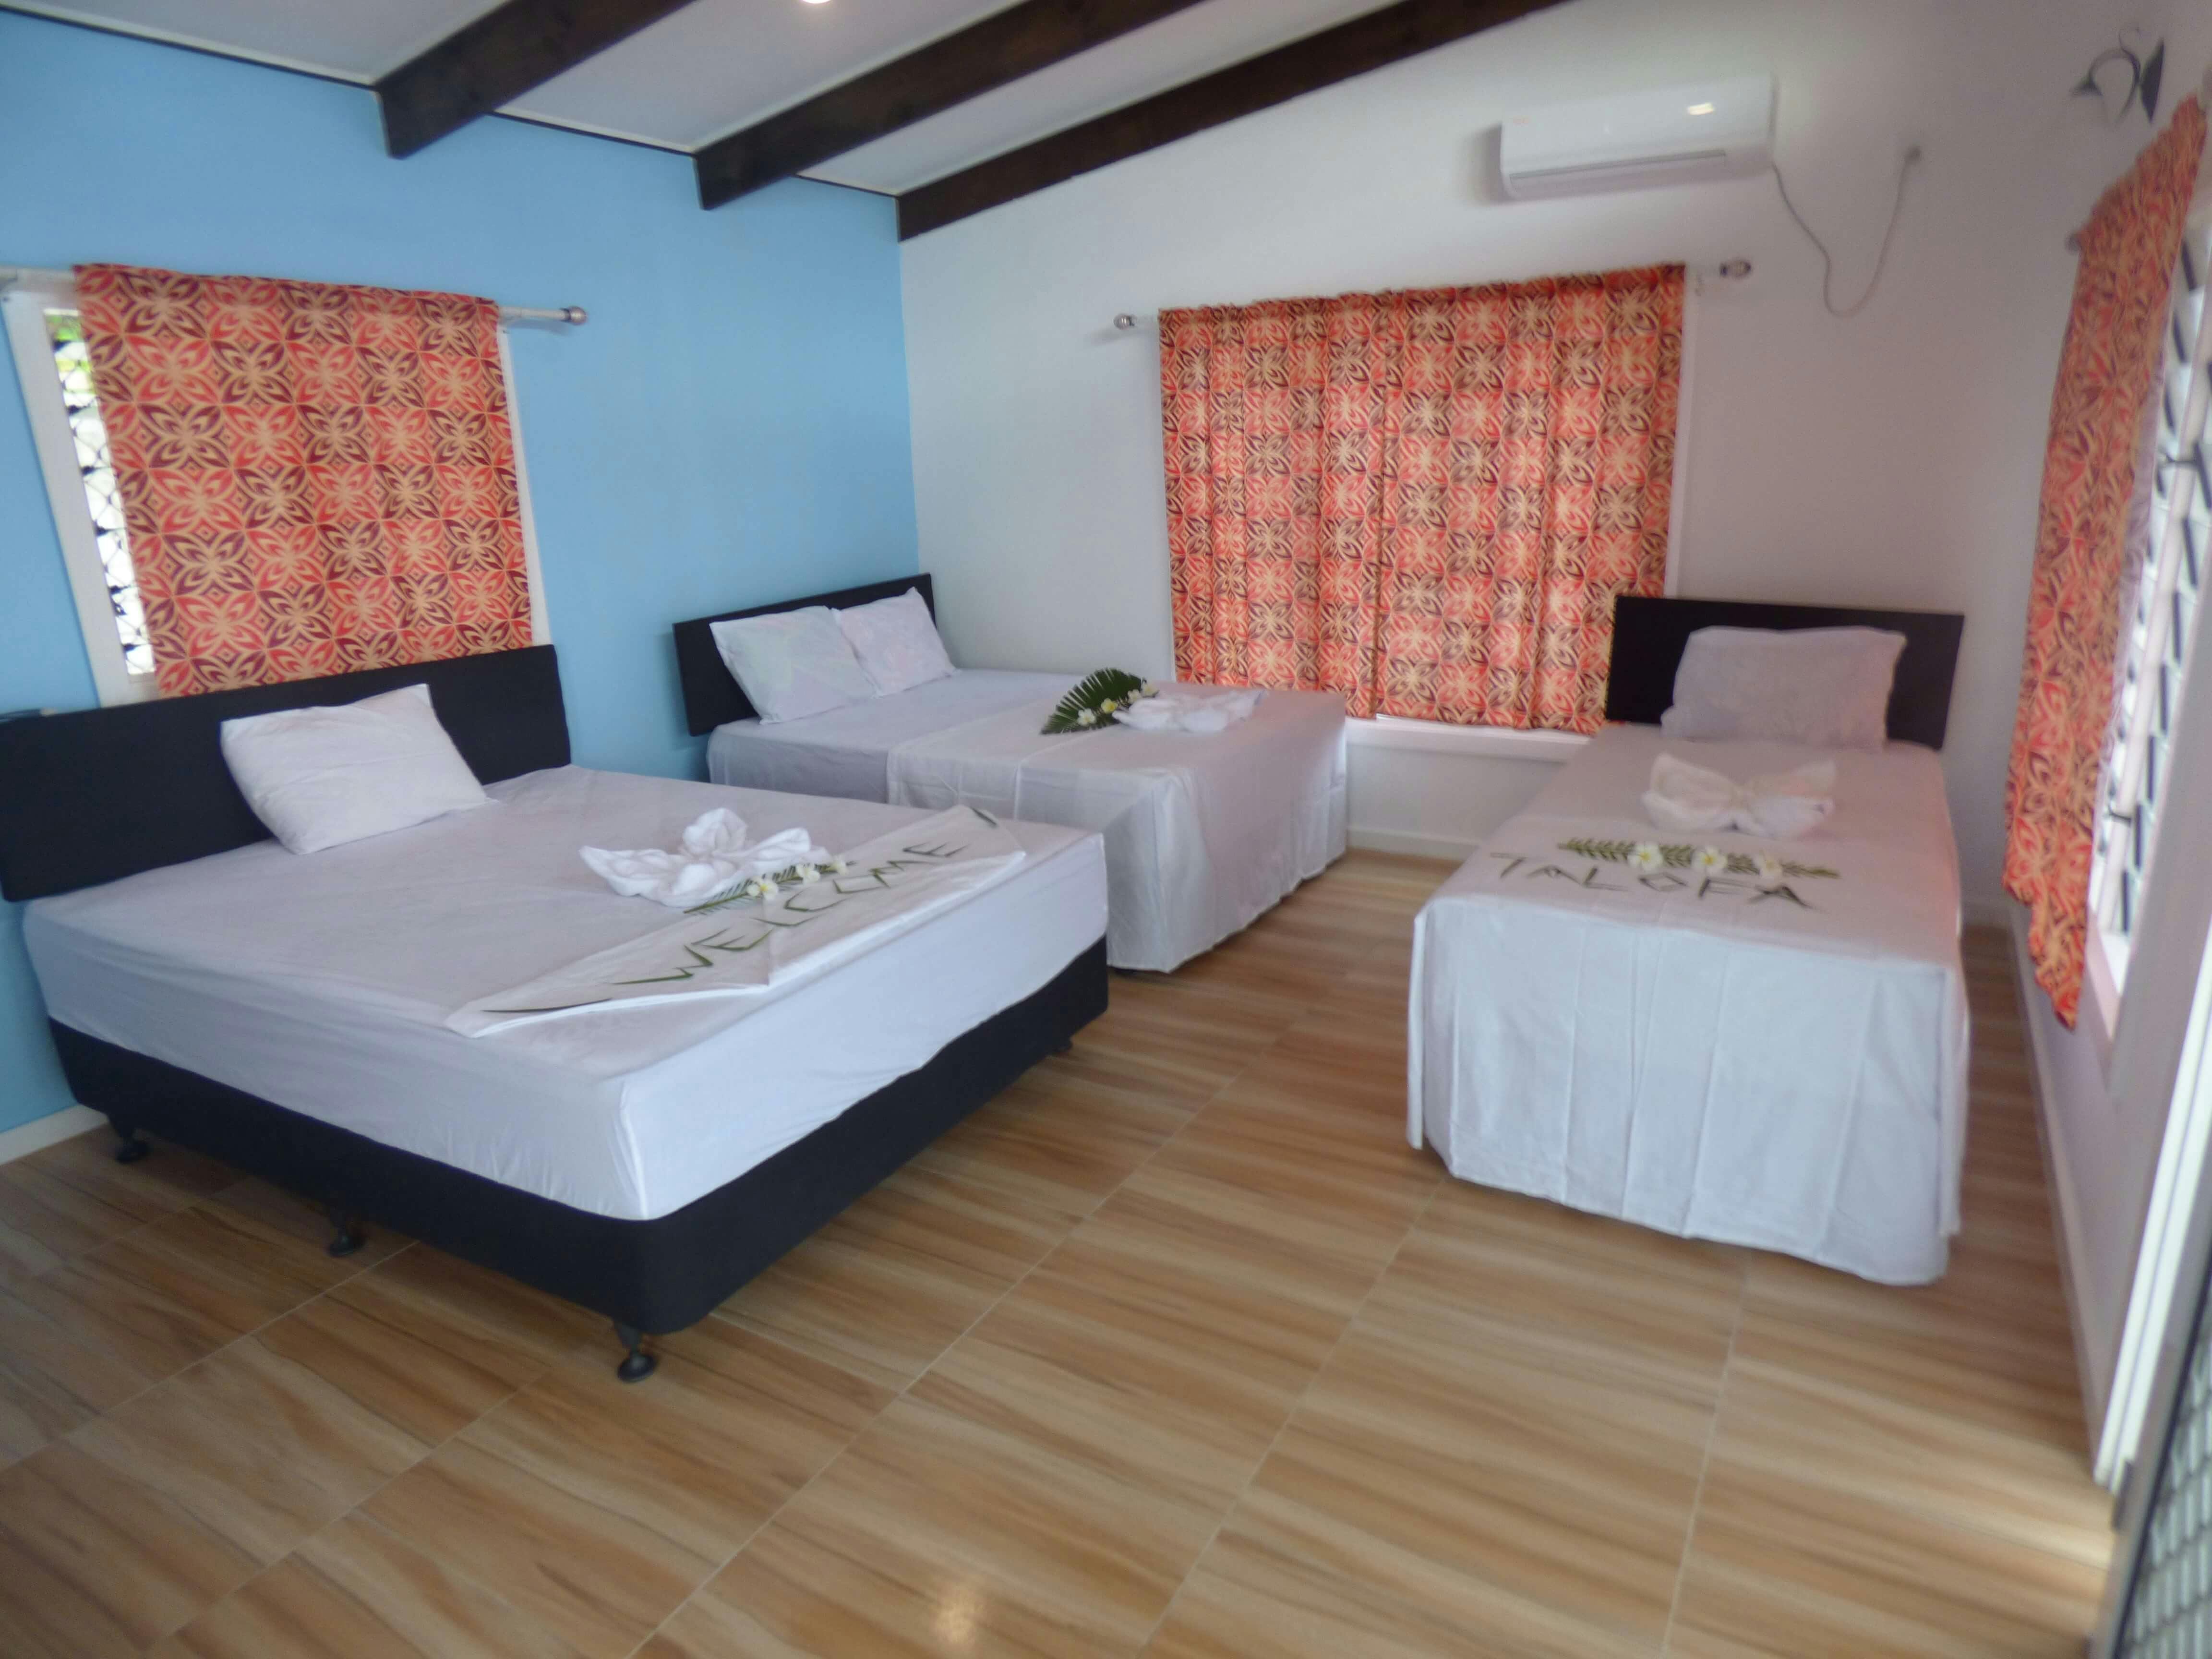 Bed room of Villa at Level 2 featuring 1 Queen Size bed, 1 Double bed and a Single bed.